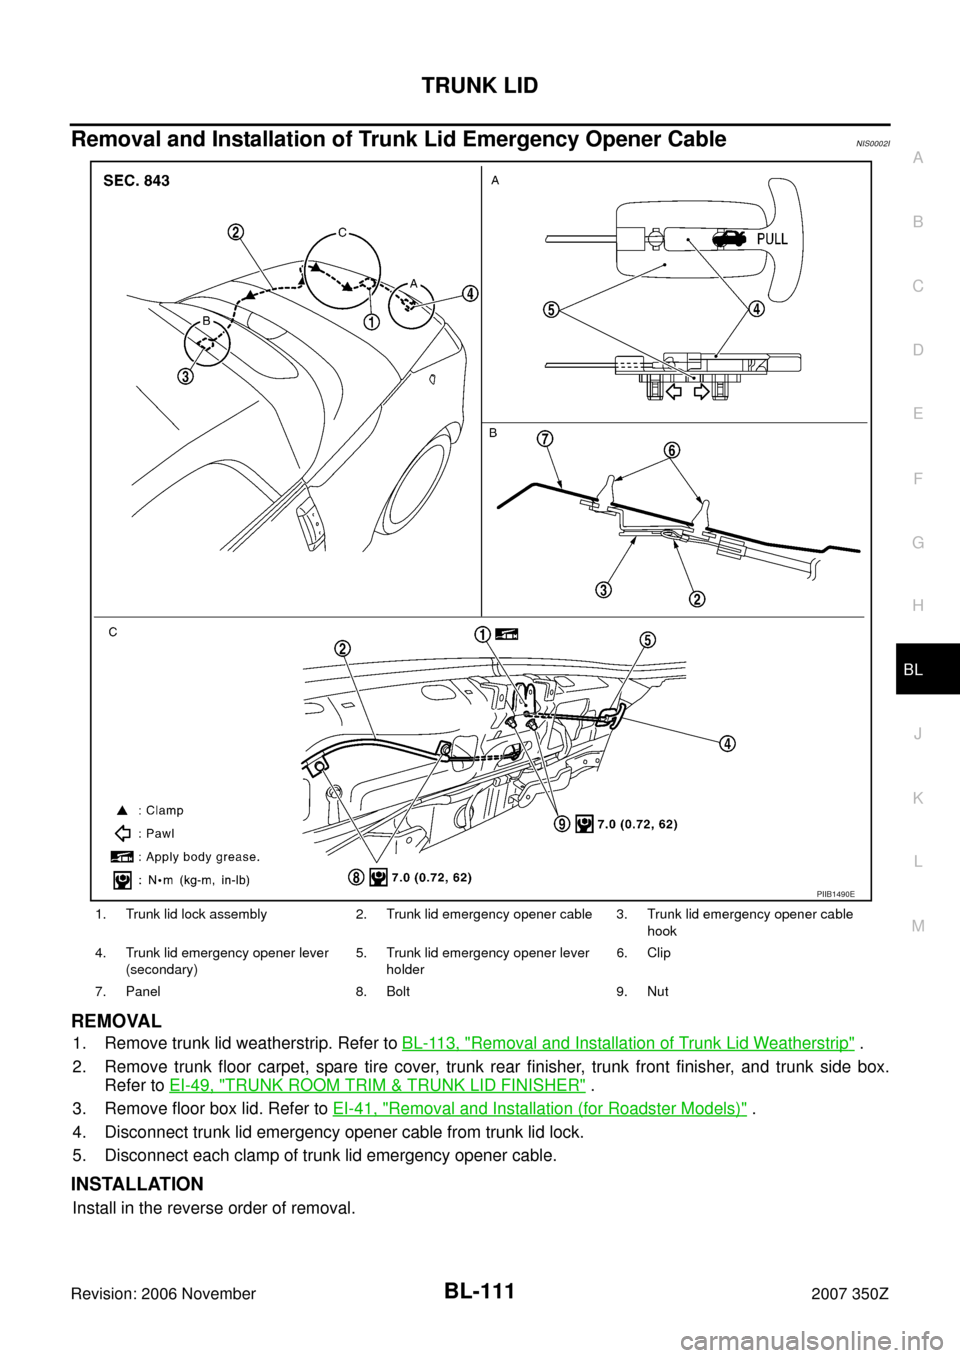 NISSAN 350Z 2007 Z33 Body, Lock And Security System User Guide TRUNK LID
BL-111
C
D
E
F
G
H
J
K
L
MA
B
BL
Revision: 2006 November2007 350Z
Removal and Installation of Trunk Lid Emergency Opener CableNIS0002I
REMOVAL
1. Remove trunk lid weatherstrip. Refer to BL-1